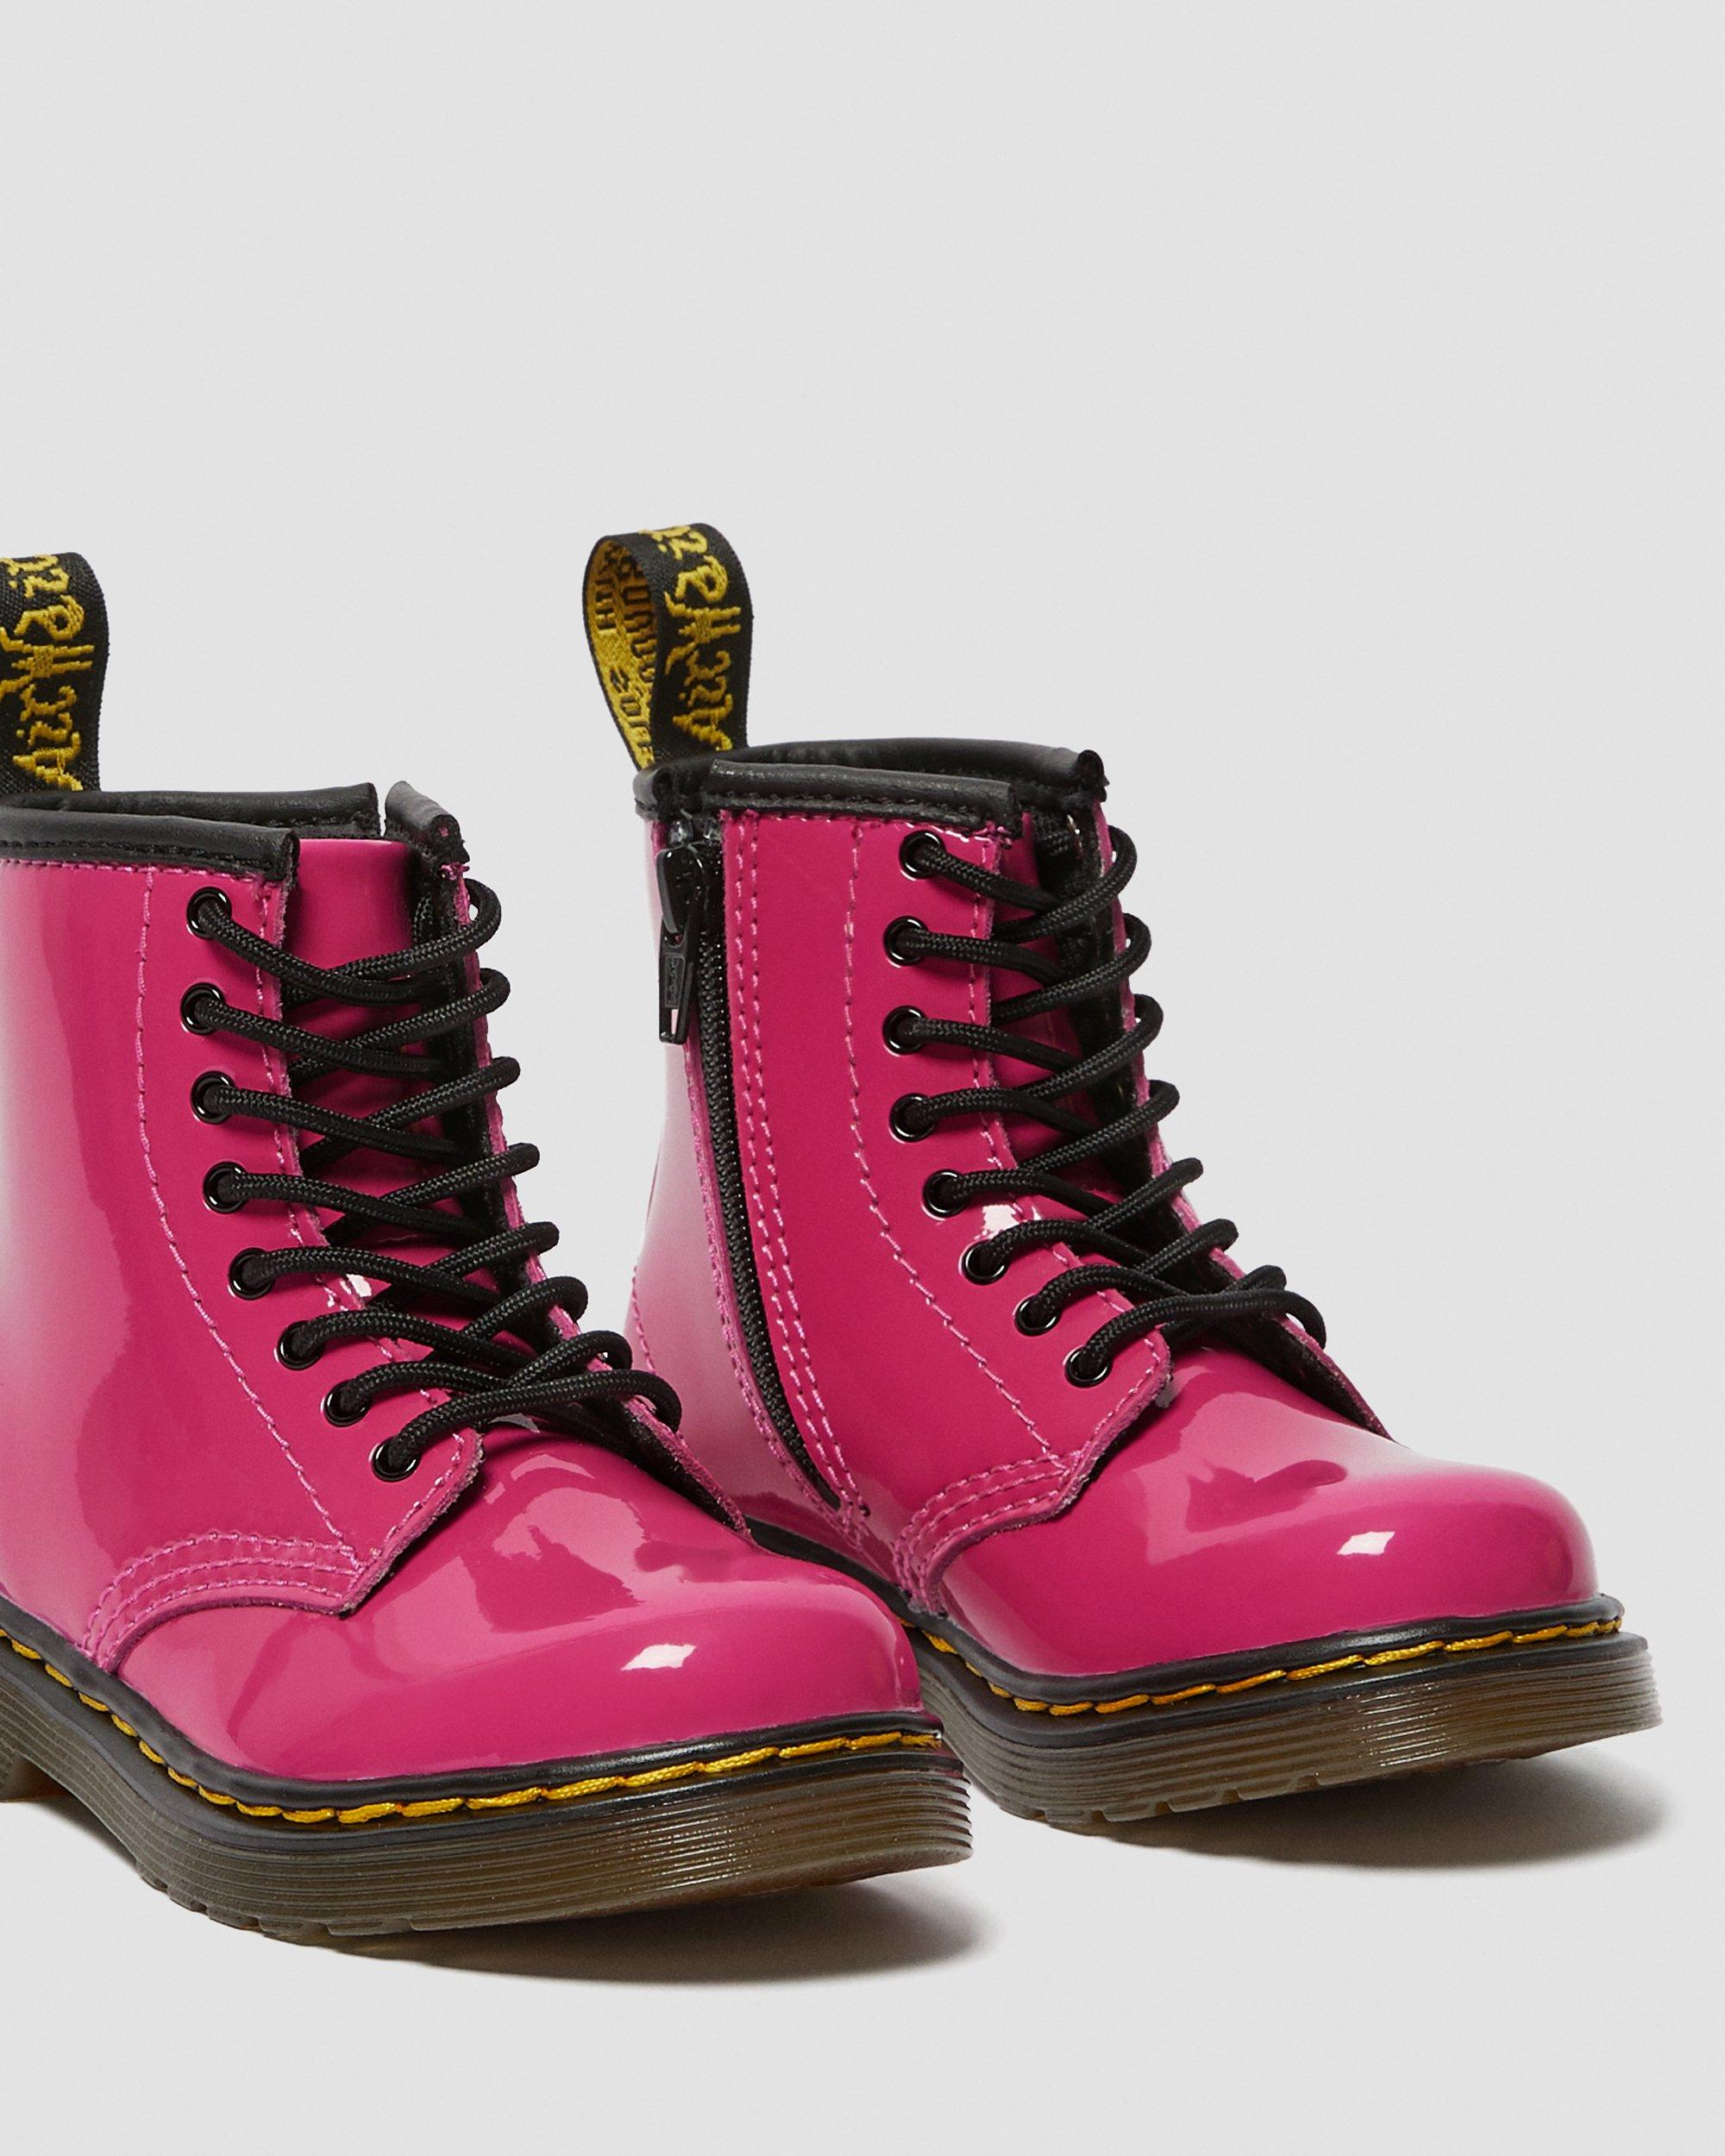 Toddler 1460 Patent Leather Lace Up Boots in Hot Pink